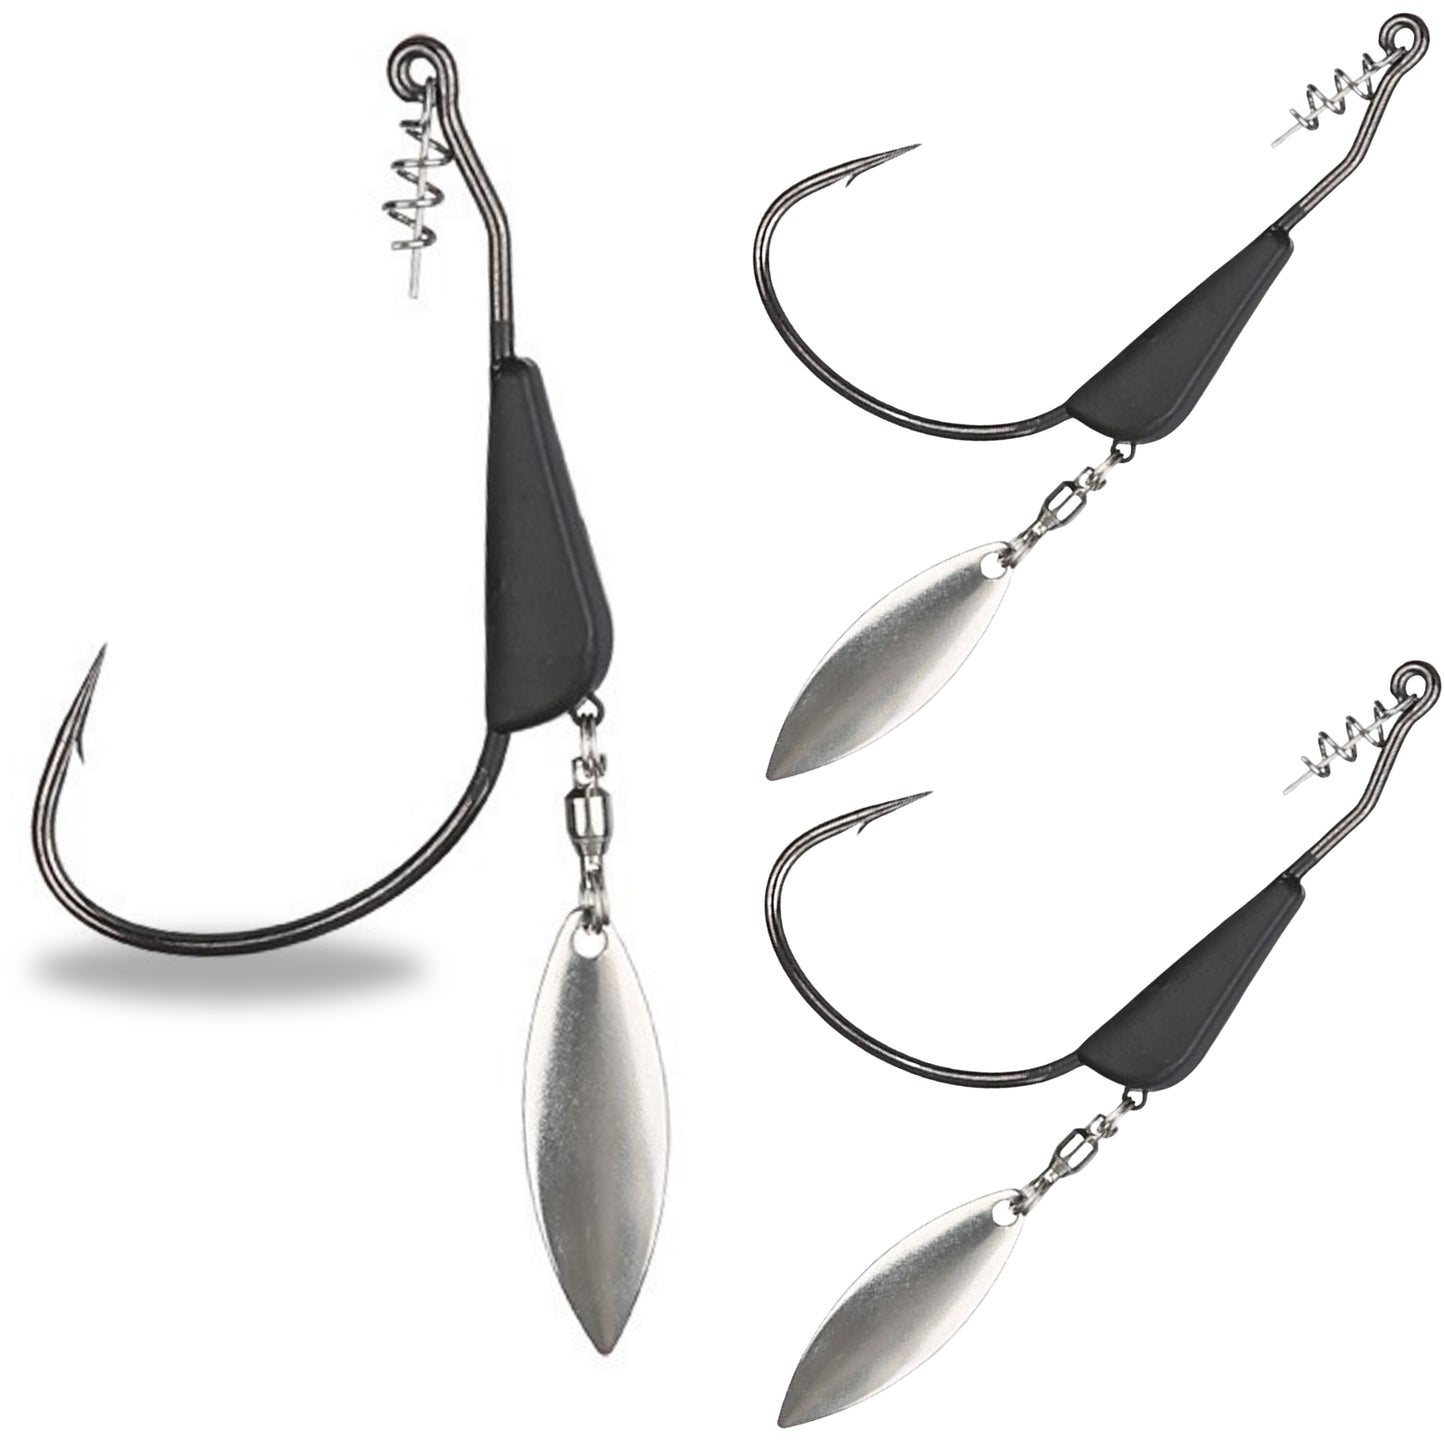 Reaction Tackle Bladed/Tungsten Weighted Swimbait Hooks- 3-Pack